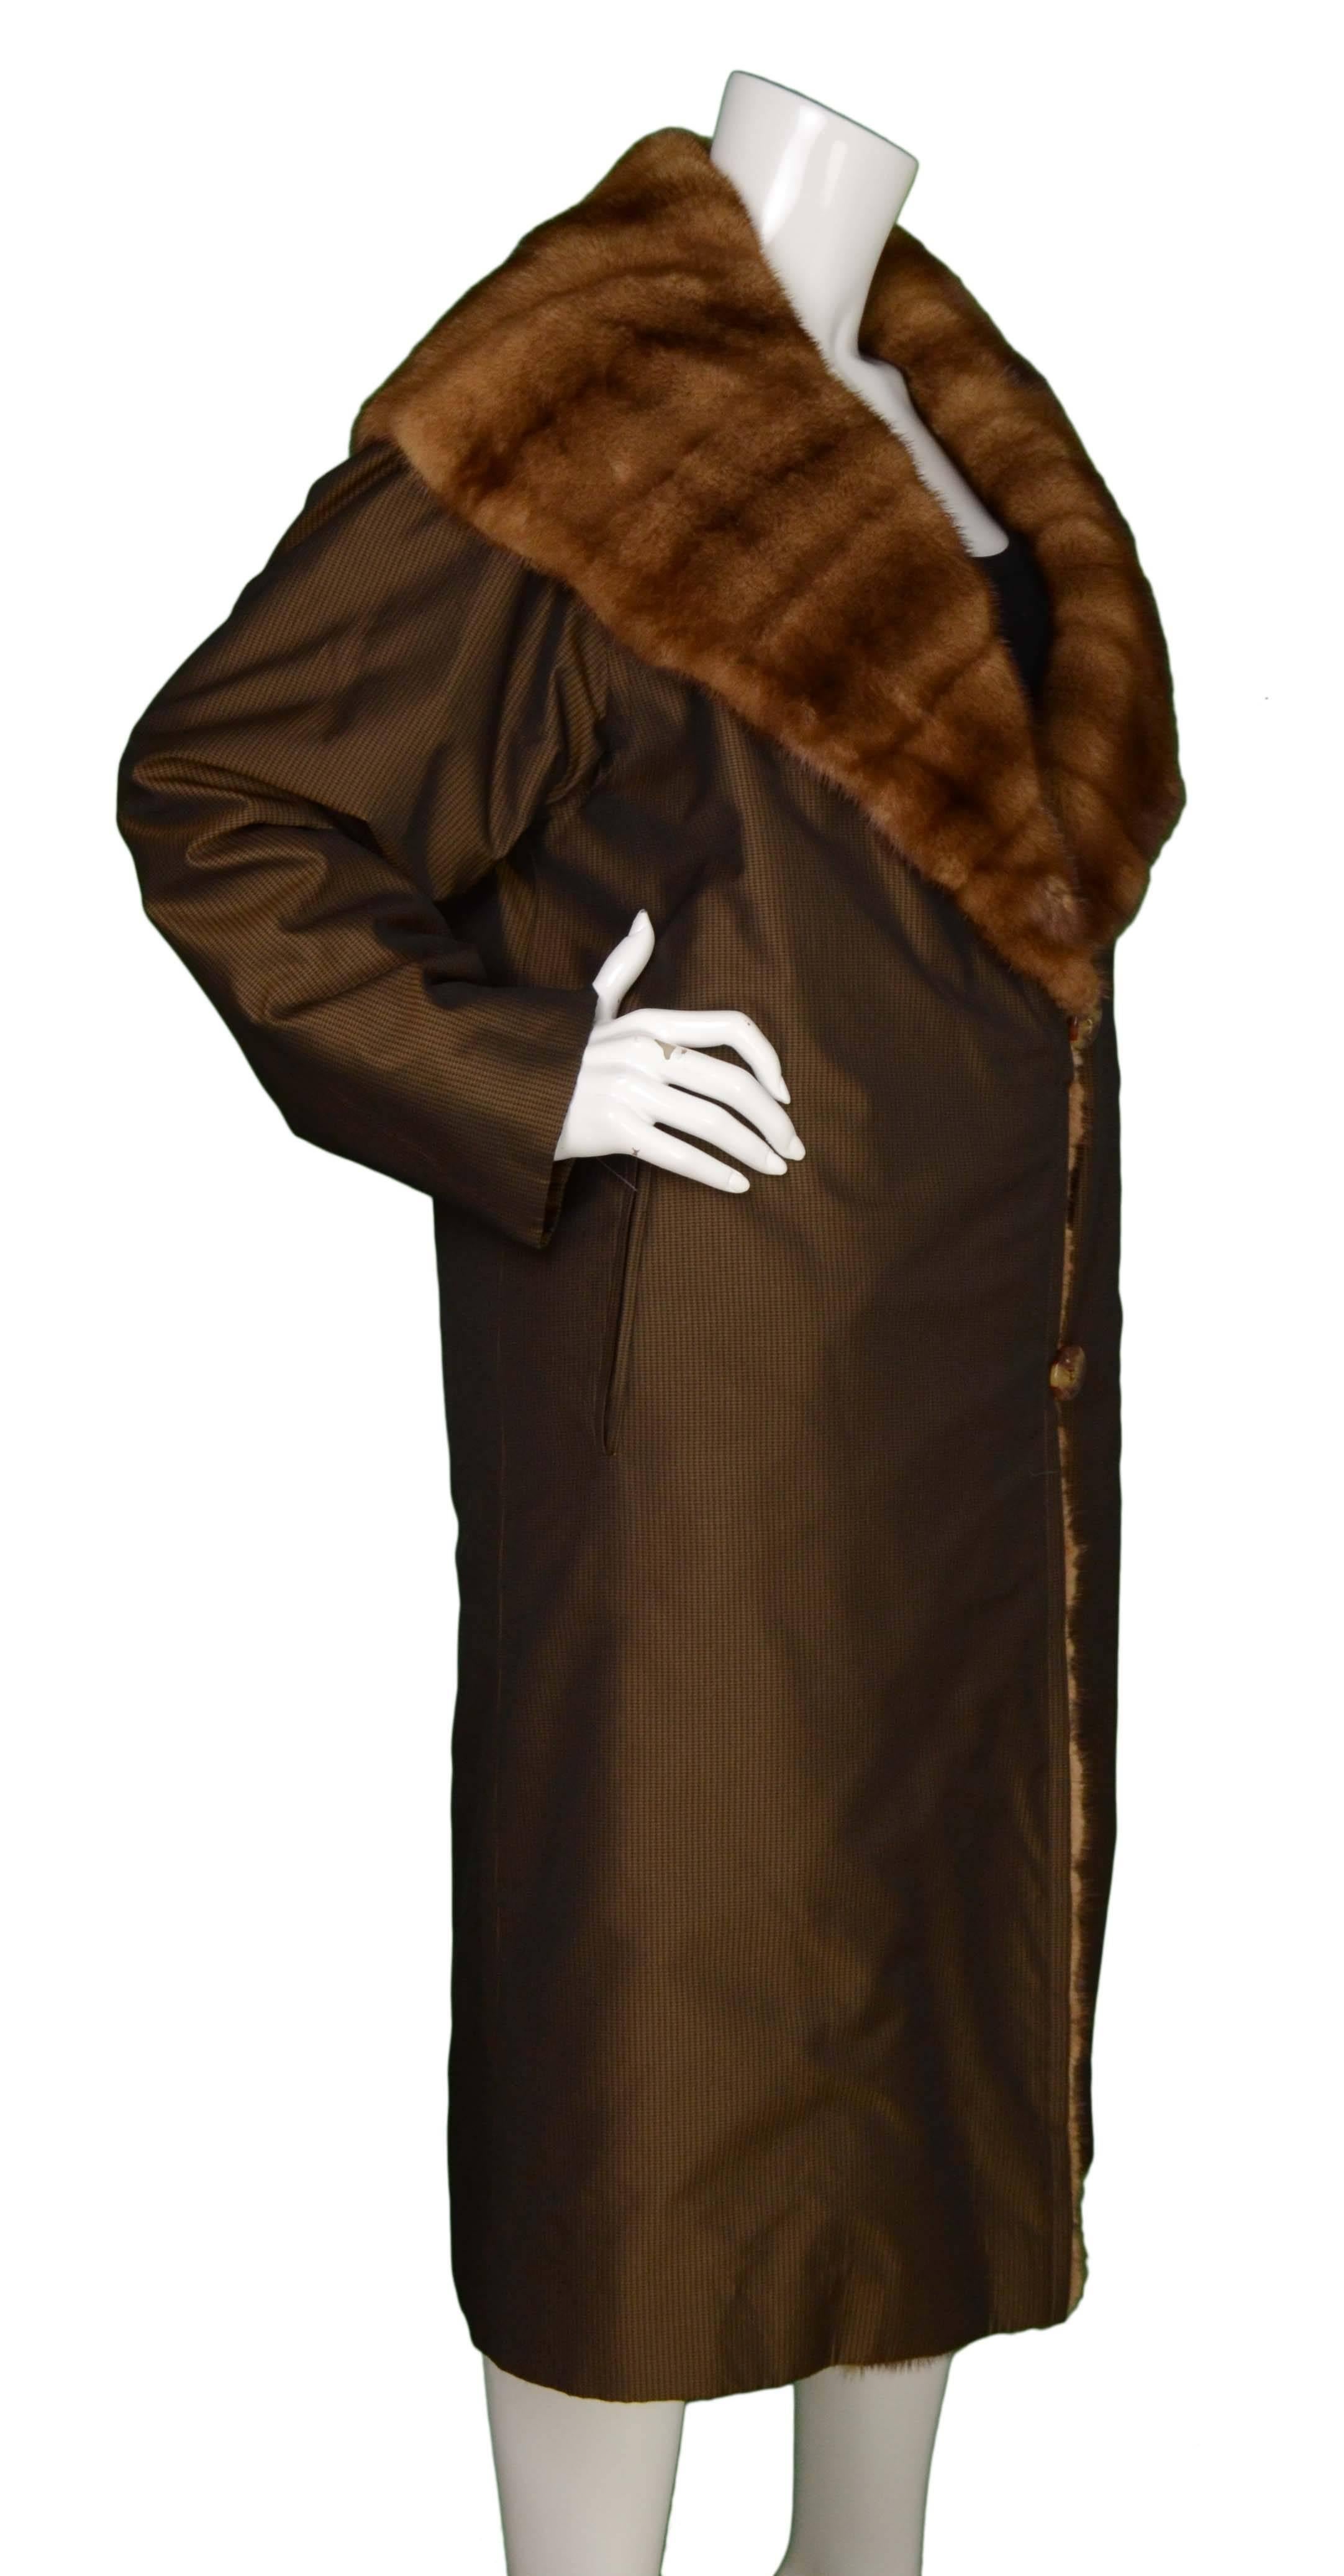 J. Mendel Brown Mink Lined Coat 
Features mini houndstooth print on exterior with oversized fur lapel

Color: Brown
Composition: Not given- believed to be a poly-blend
Lining: Brown mink
Closure/Opening: Button front closure
Exterior Pockets: